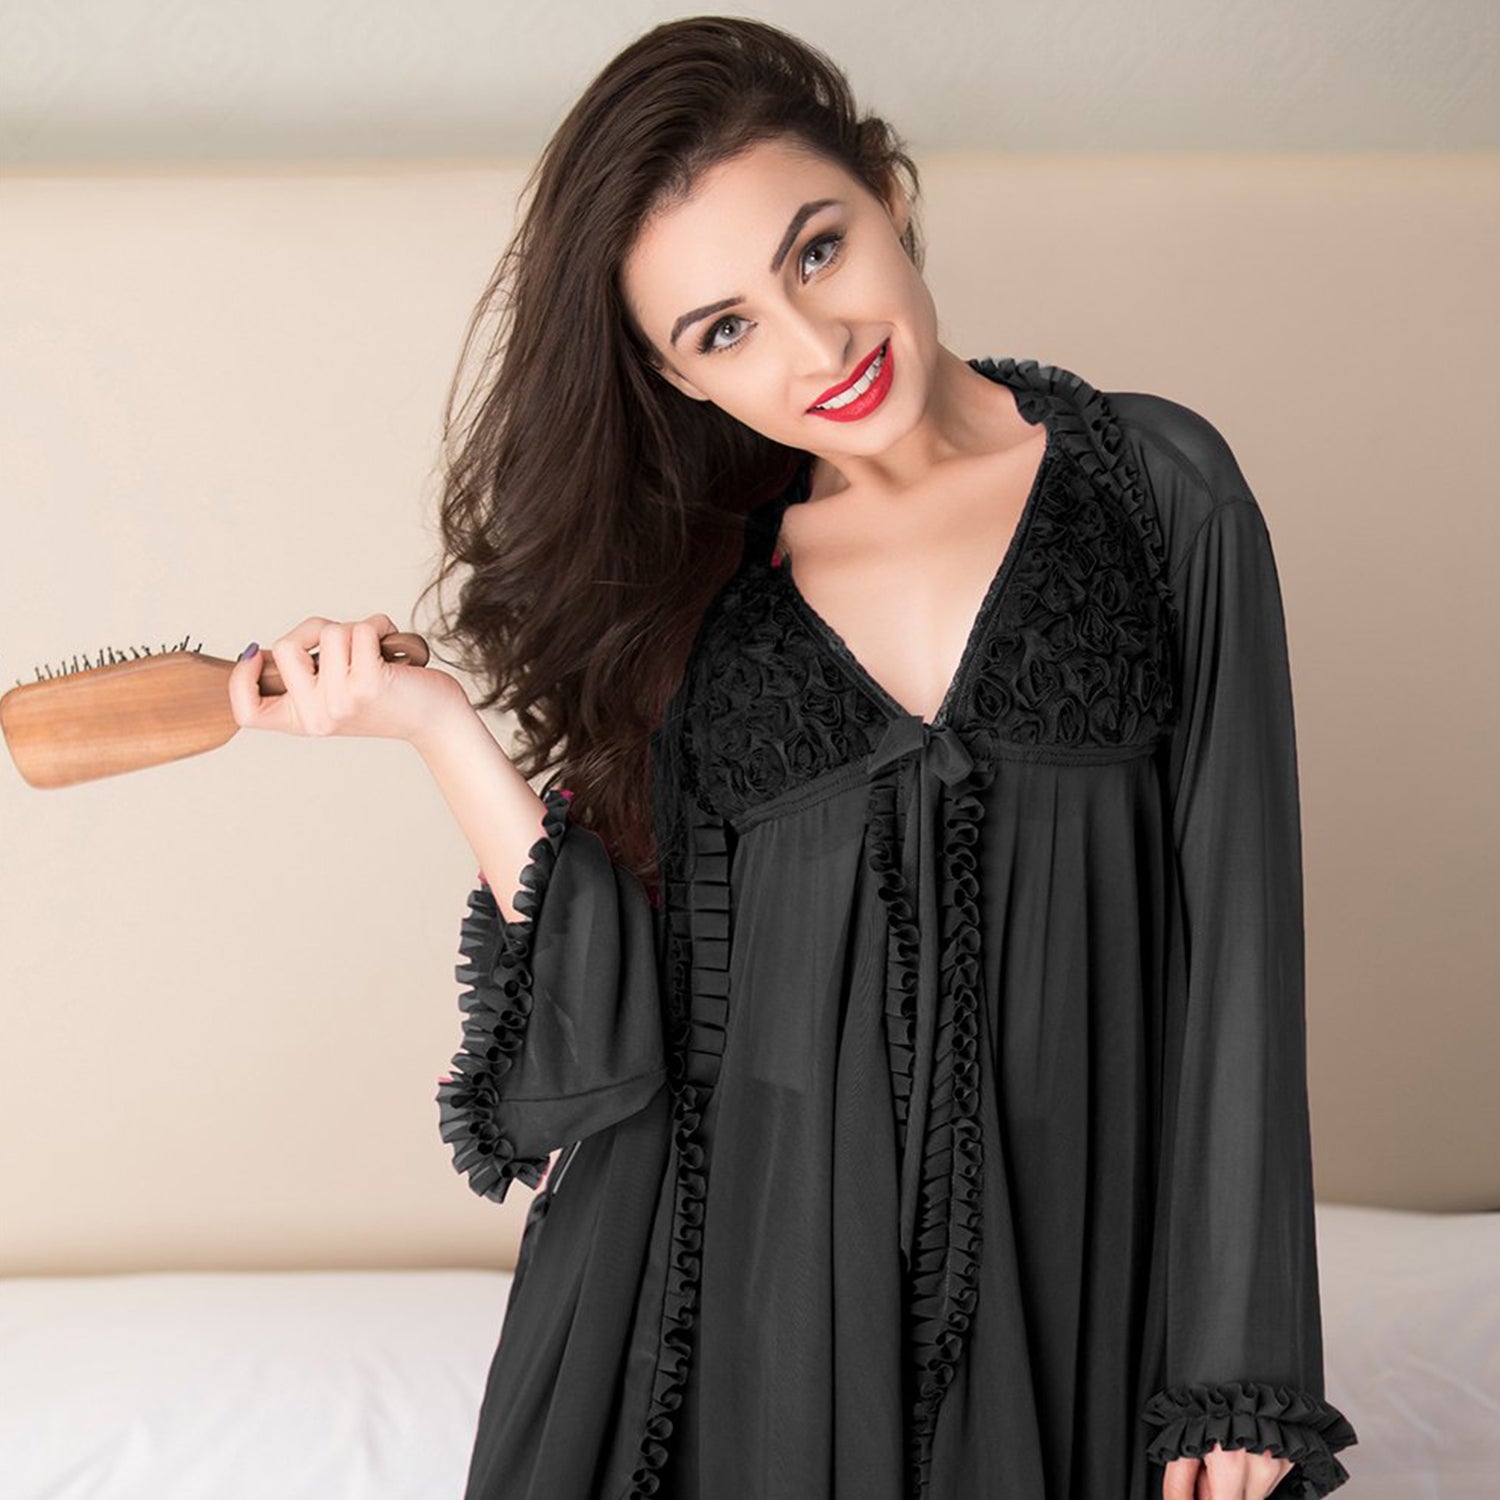 Illusion nude tulle Nightgown set black - Private Lives